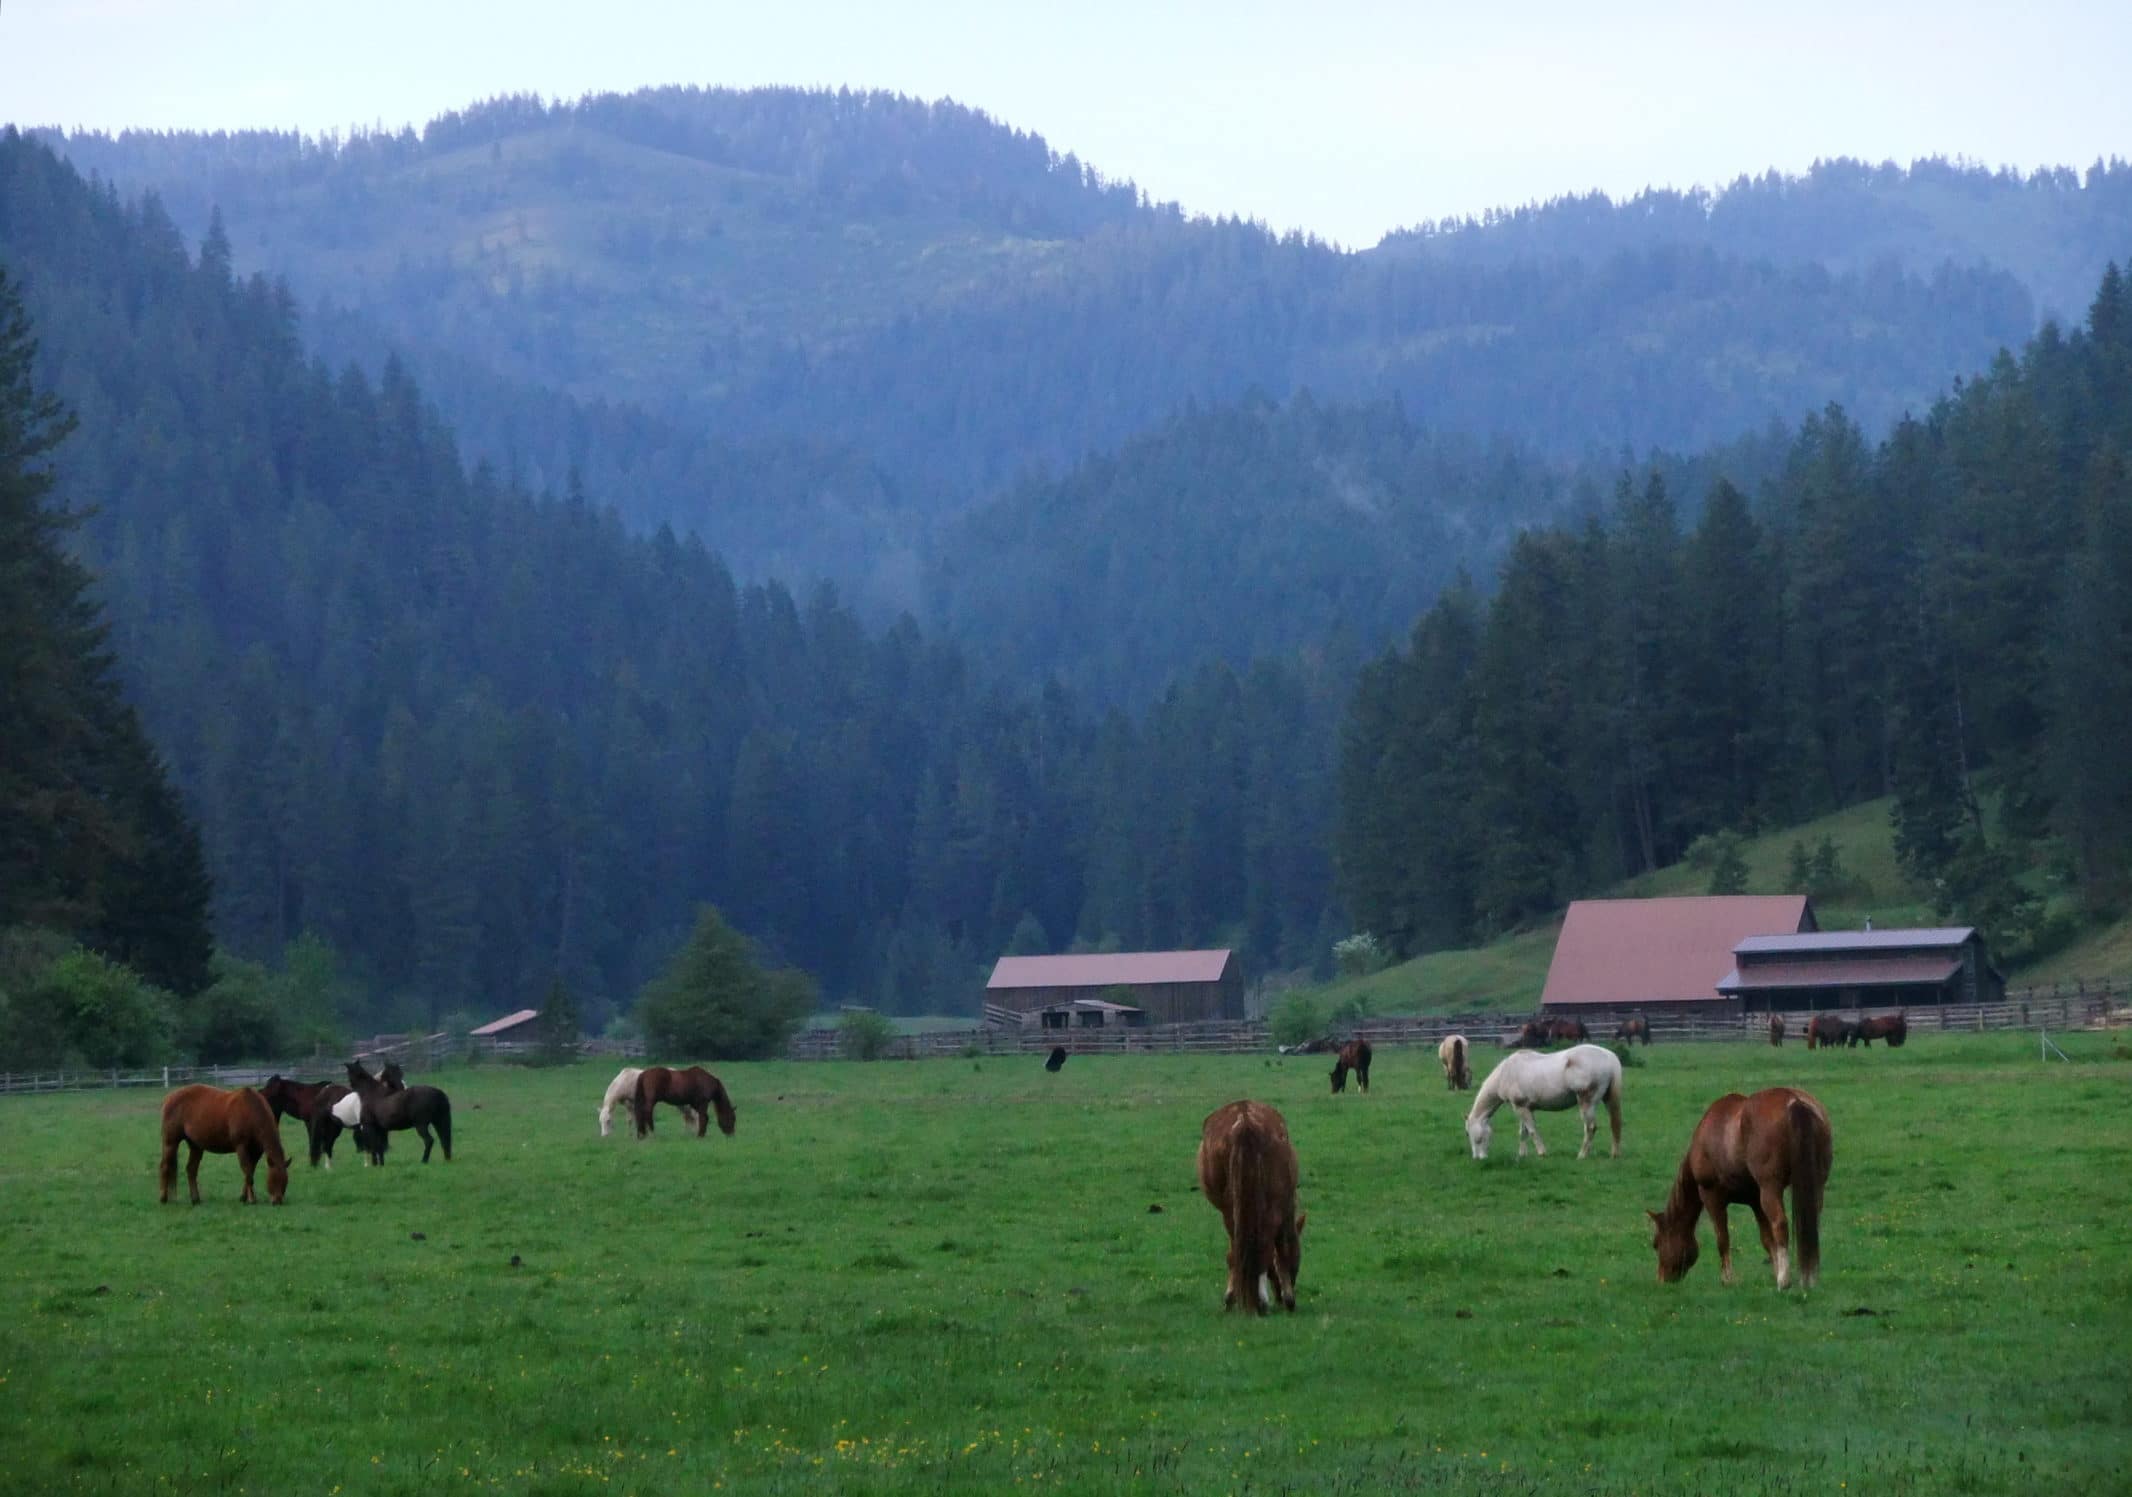 The mountains provide a gorgeous setting for a Red Horse Mountain Ranch family vacation.